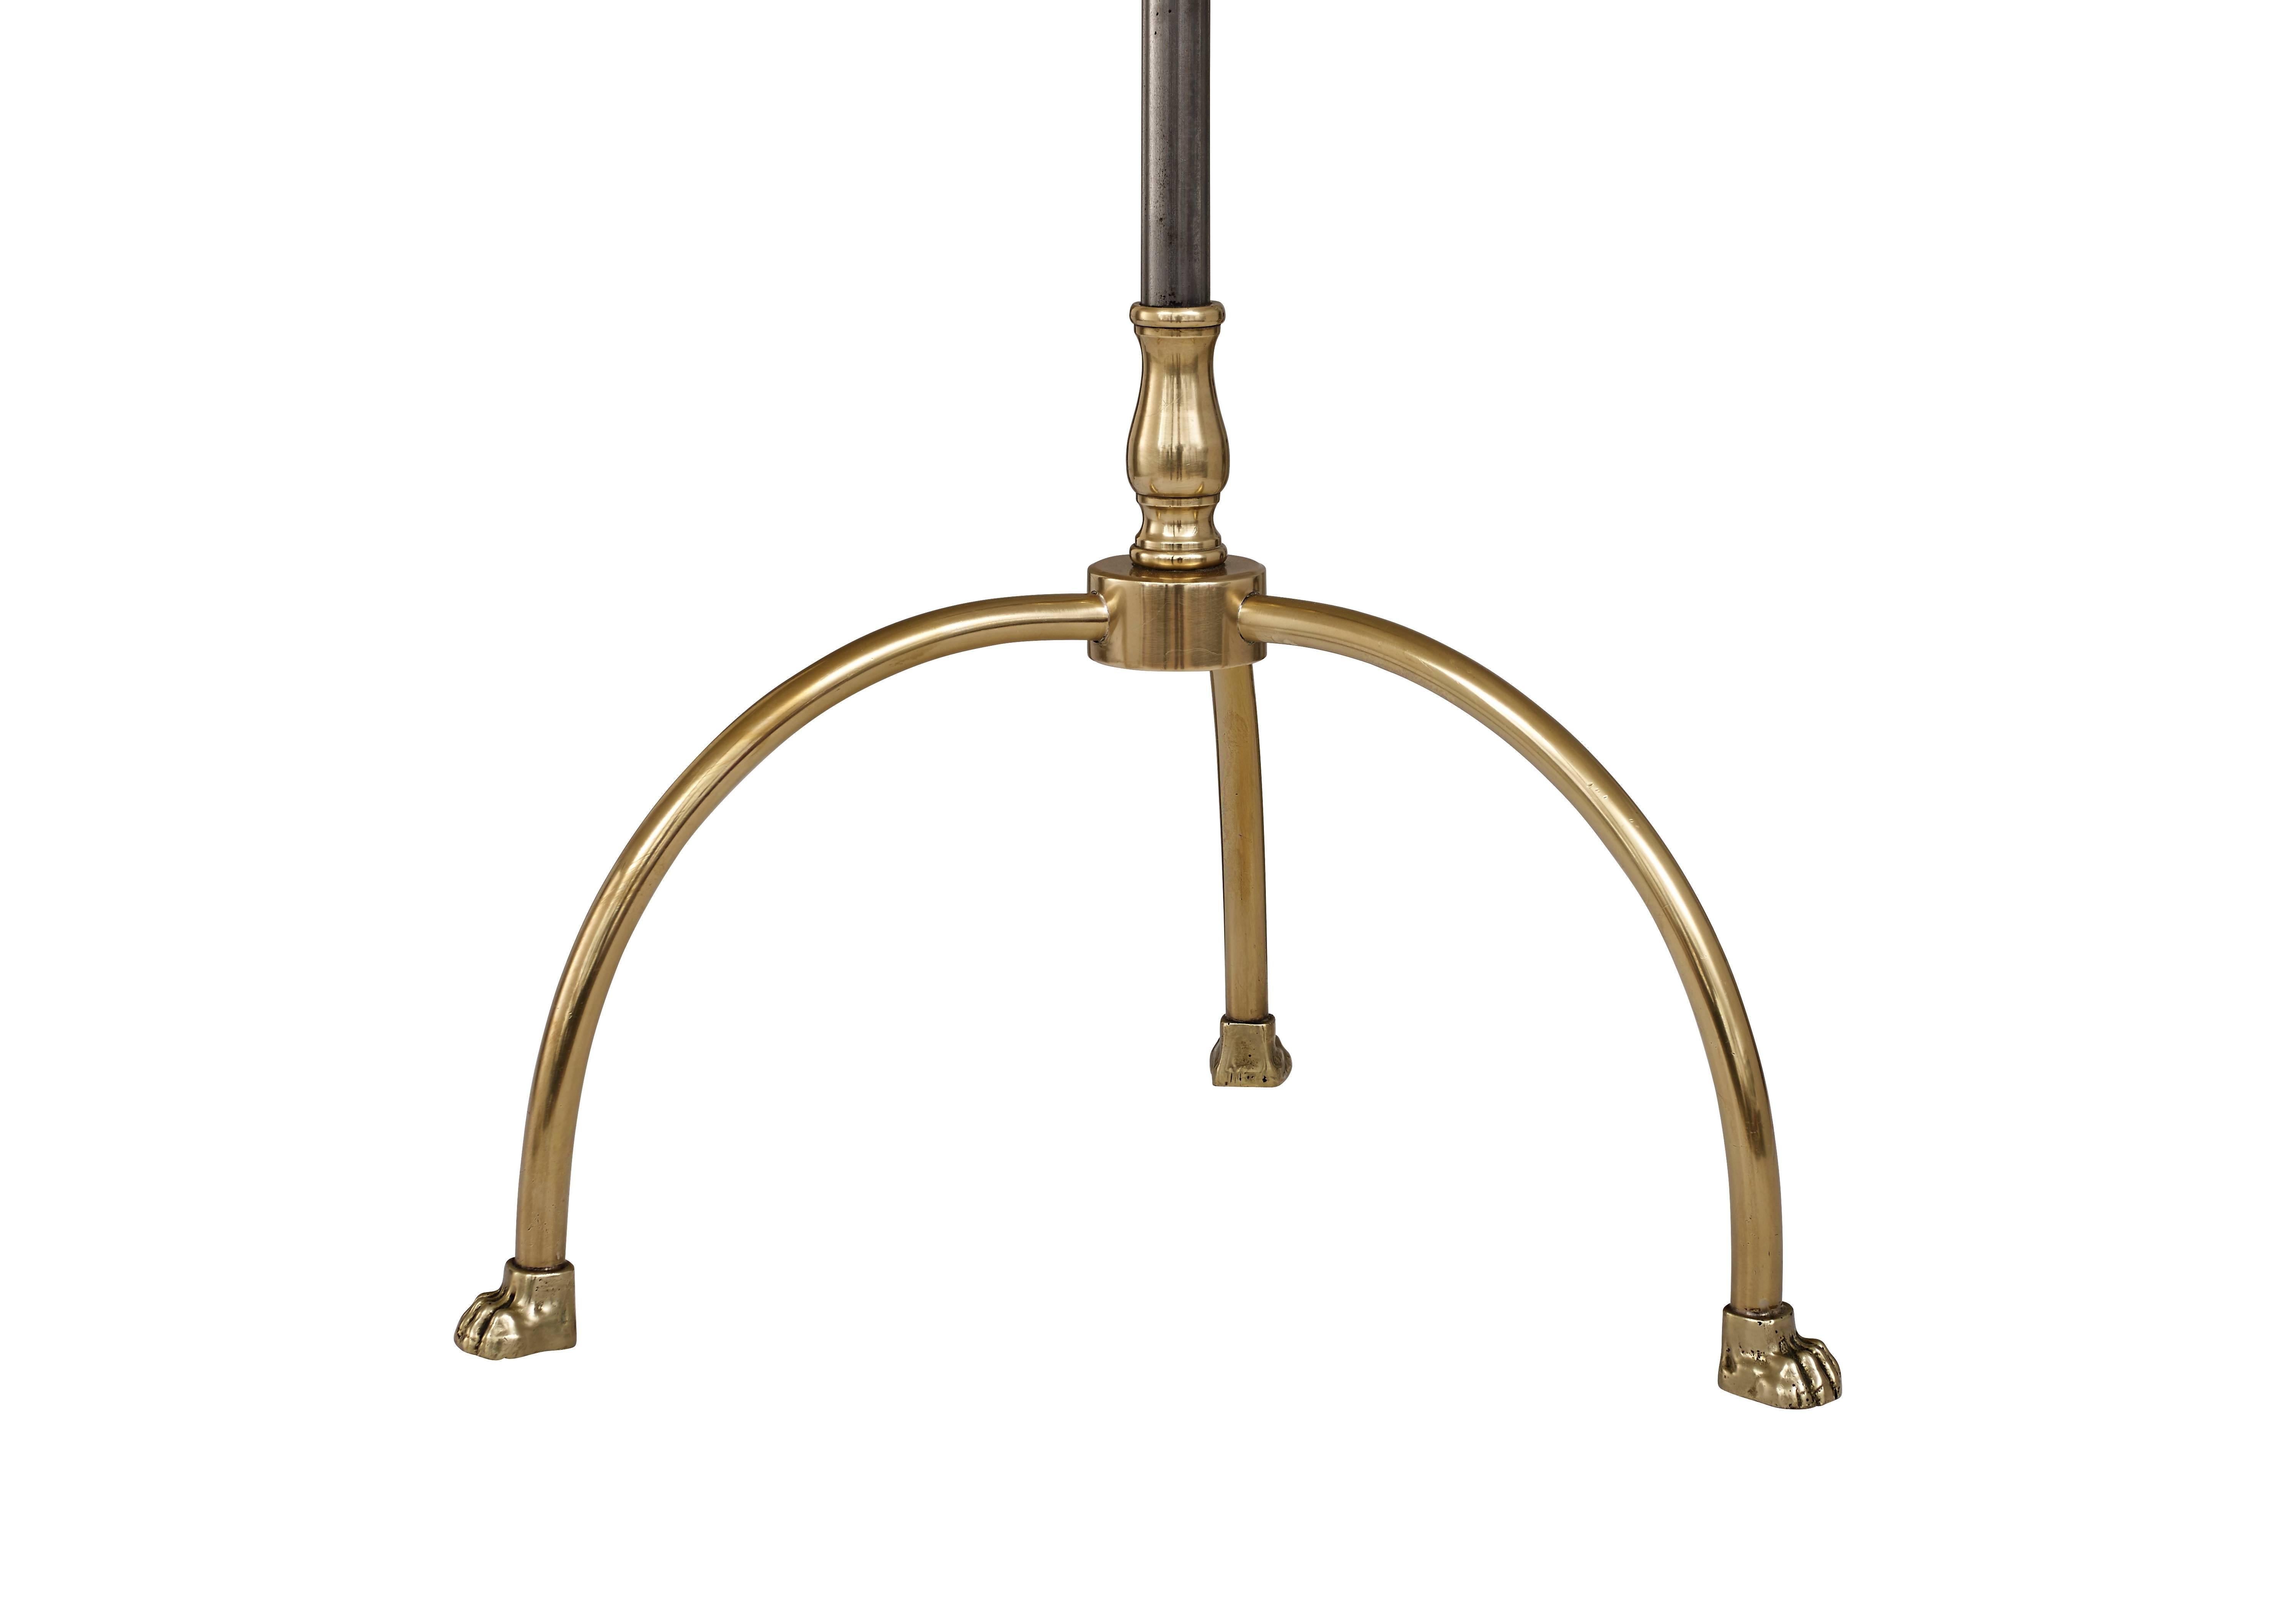 French Maison Jansen Brushed Metal and Brass Adjustable Reading Floor Lamp For Sale